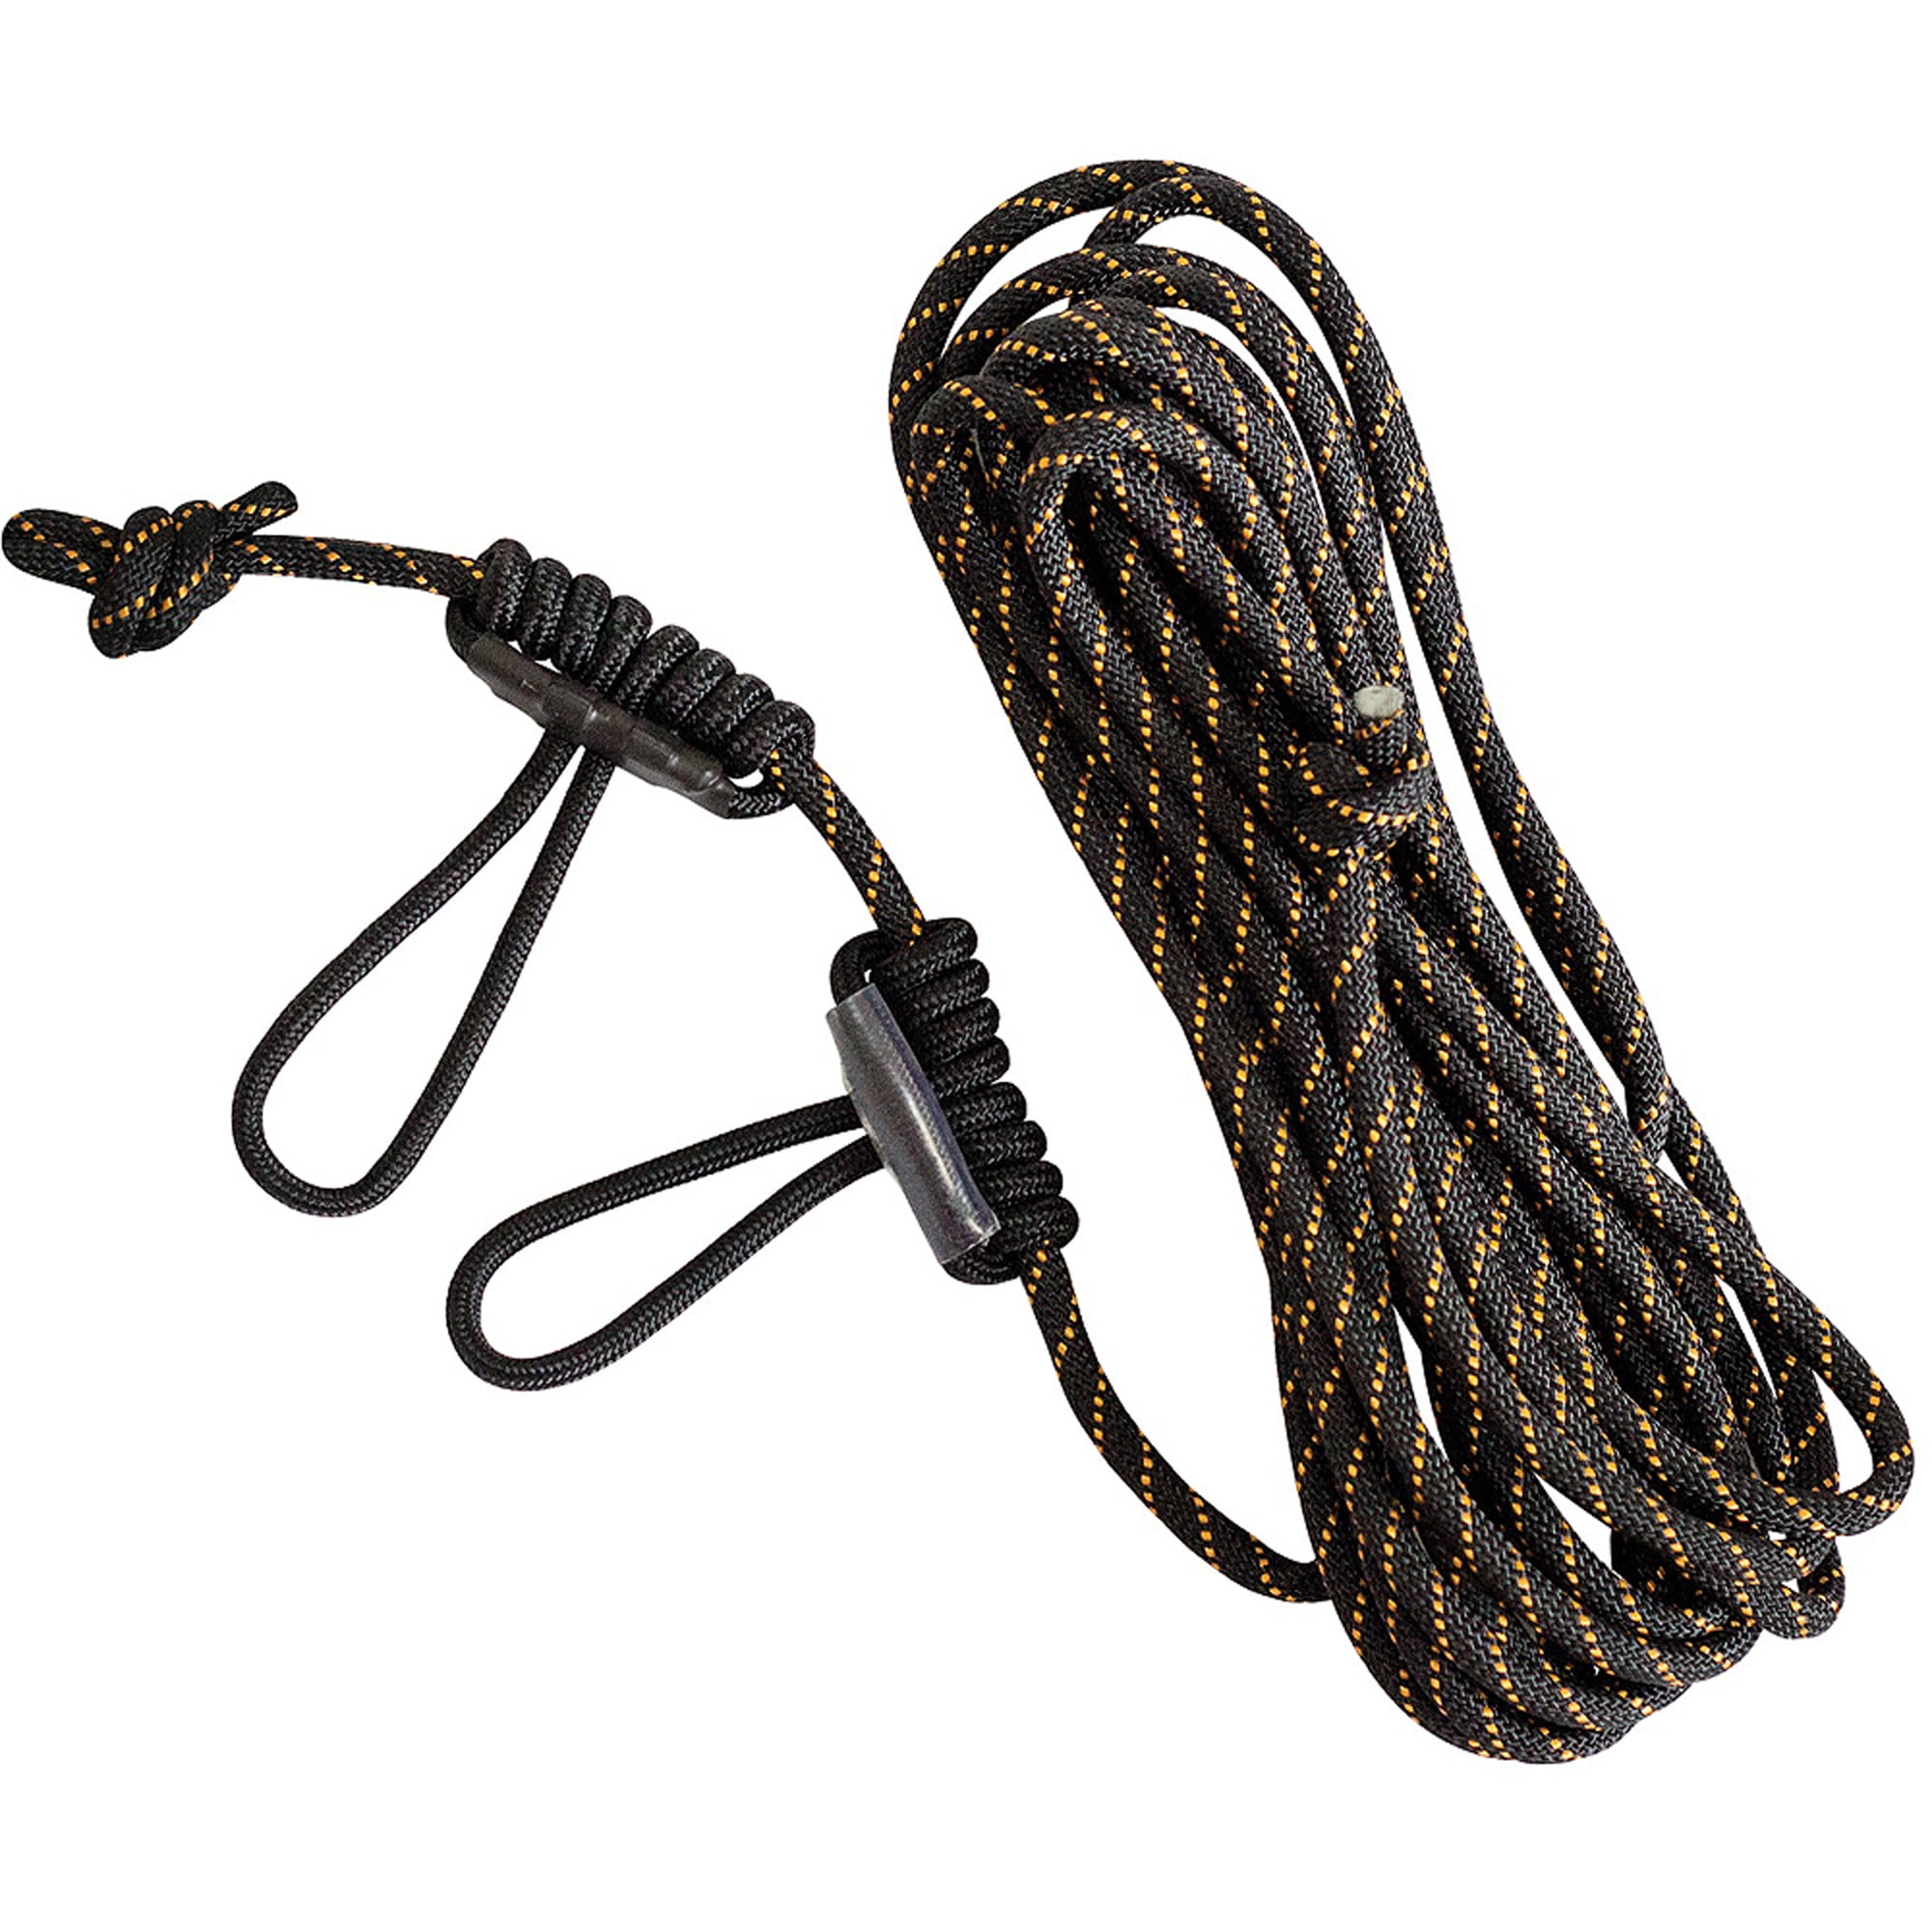 New MUDDY SAFE-LINE fall arrest systemn 30 foot safety line 2 prussic carabiners 